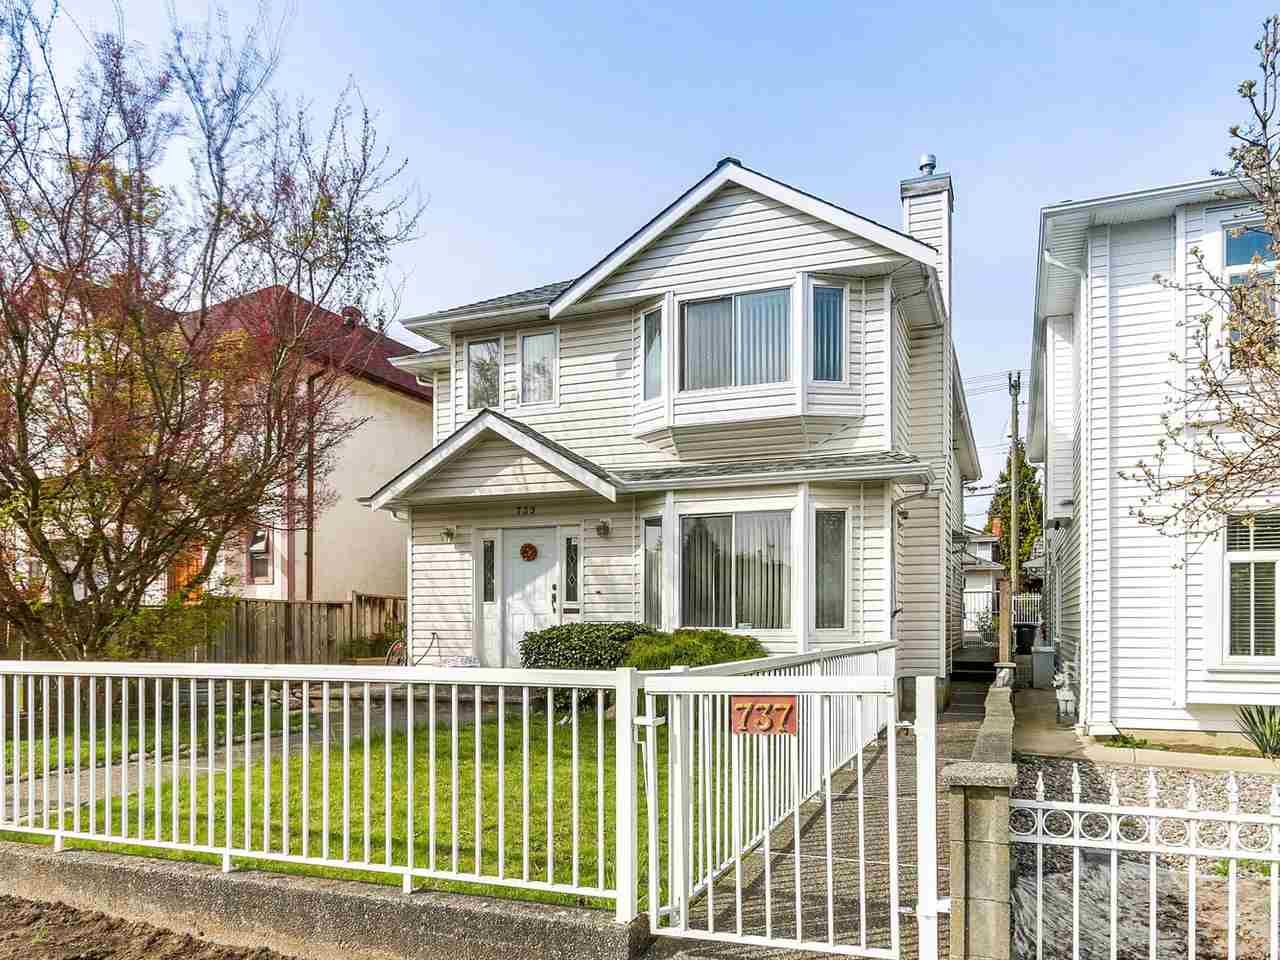 Main Photo: 737 W 69TH Avenue in Vancouver: Marpole 1/2 Duplex for sale (Vancouver West)  : MLS®# R2156415